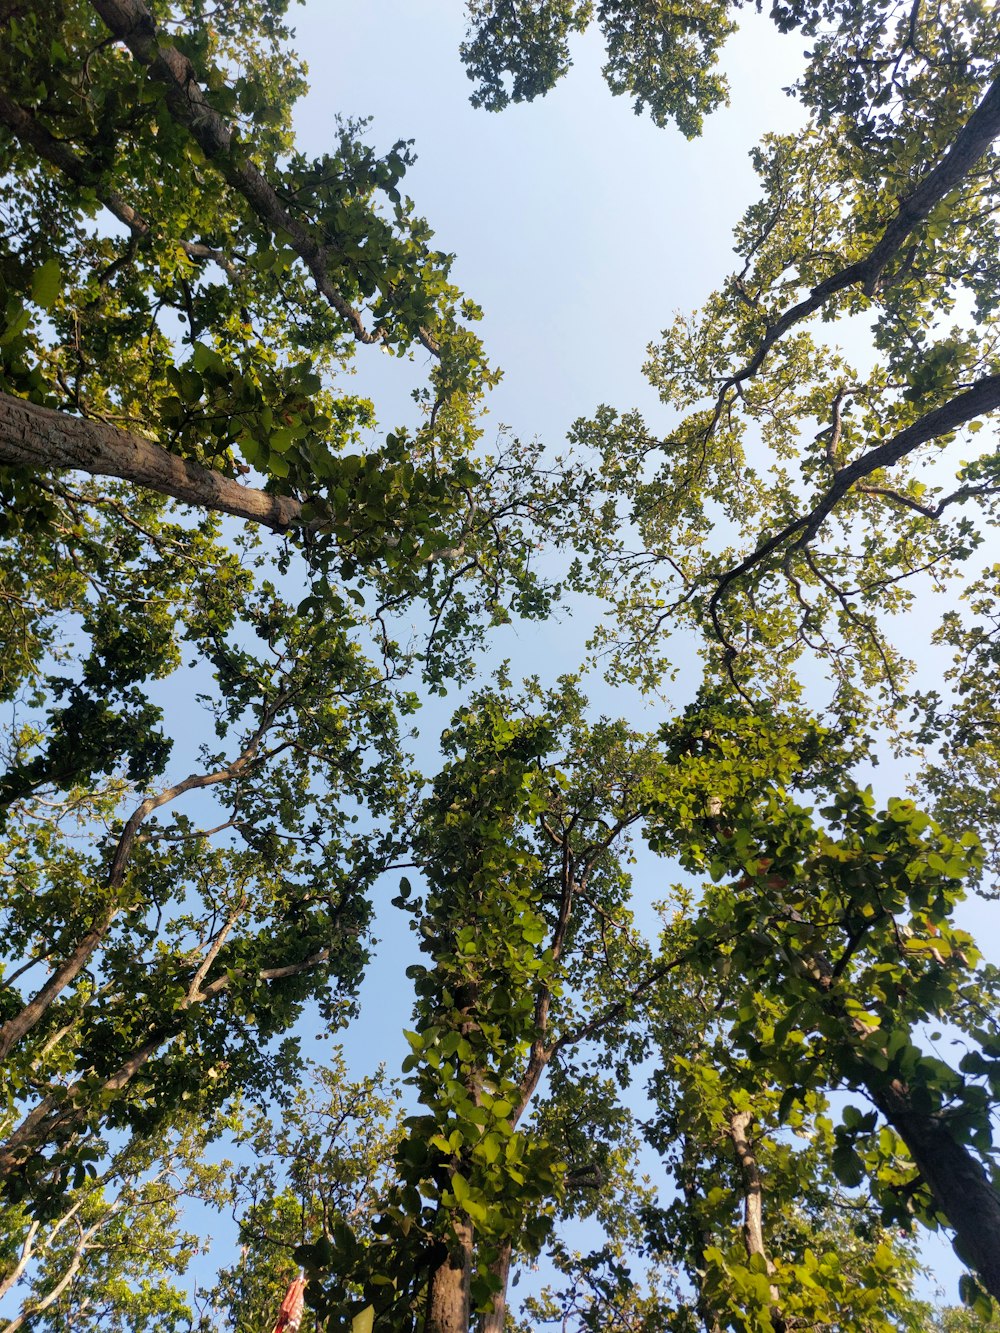 looking up at the tops of several trees